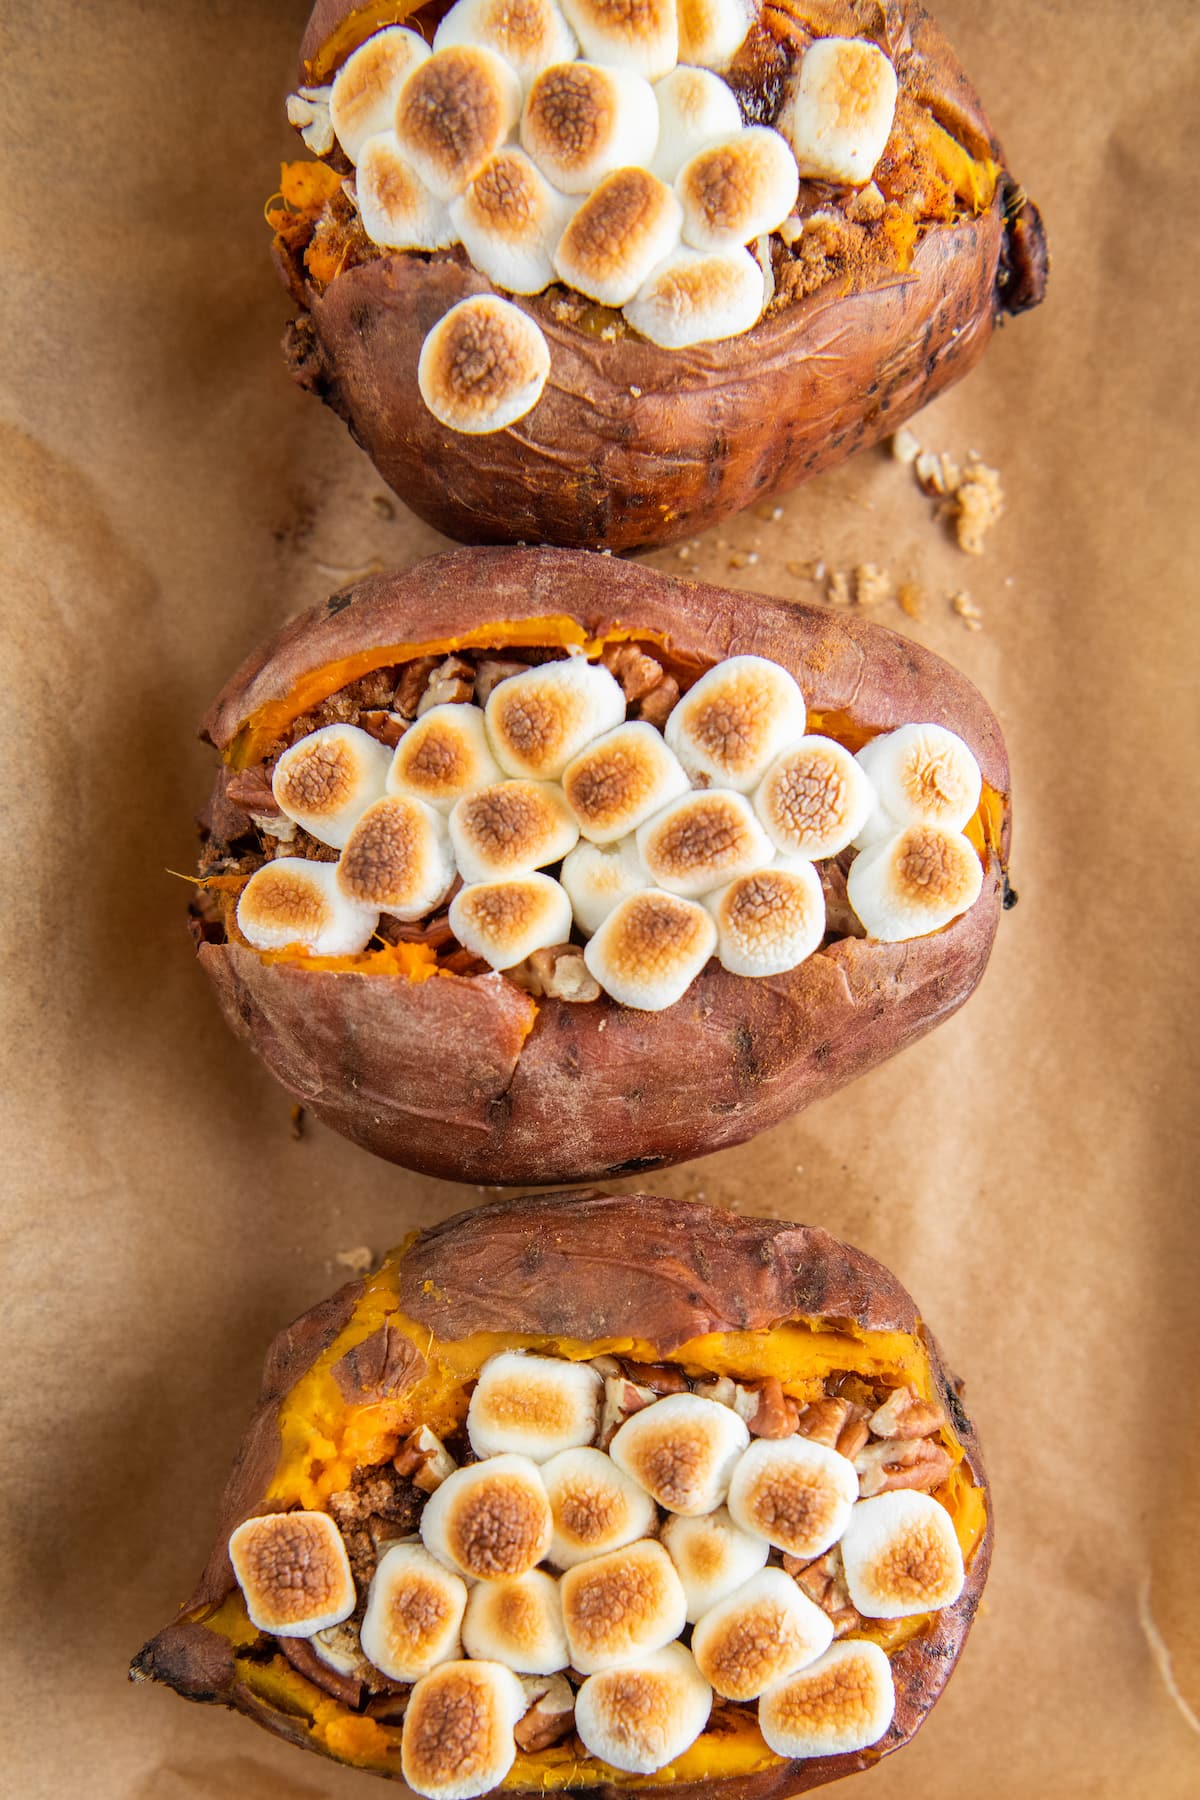 Twice baked sweet potatoes filled with butter, cinnamon, brown sugar, pecans and toasted marshmallows.